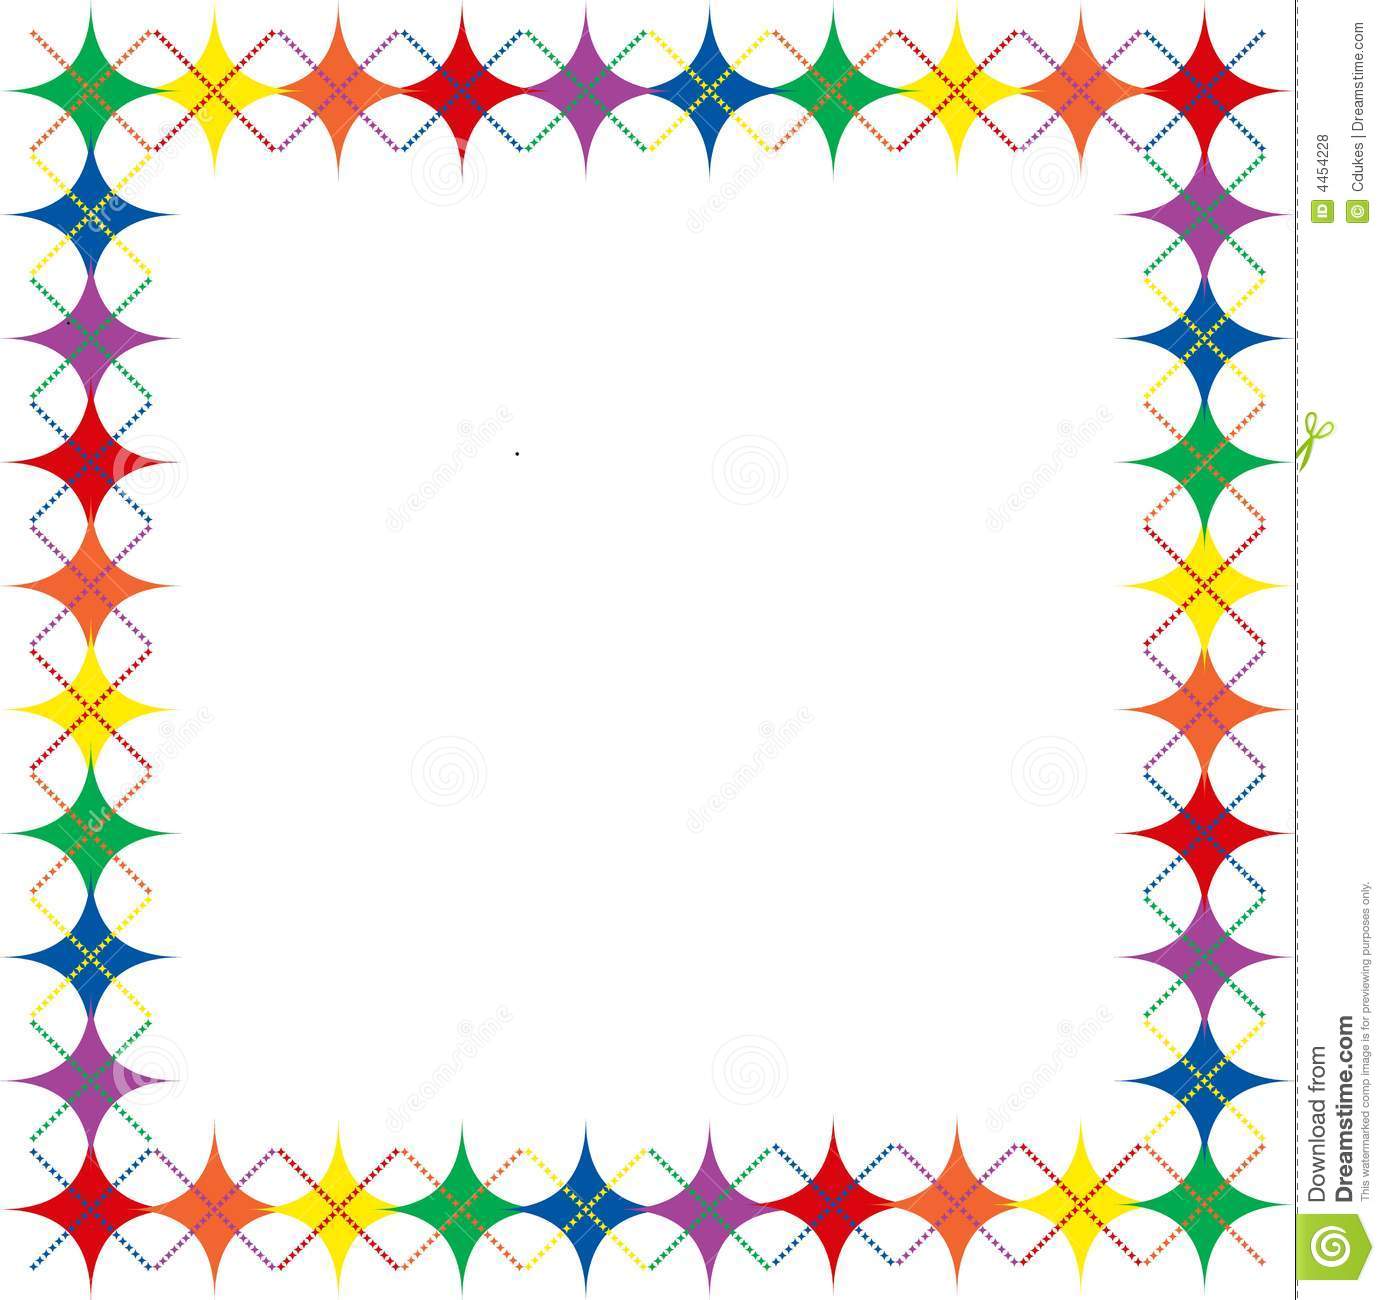 Colorful borders clipart.